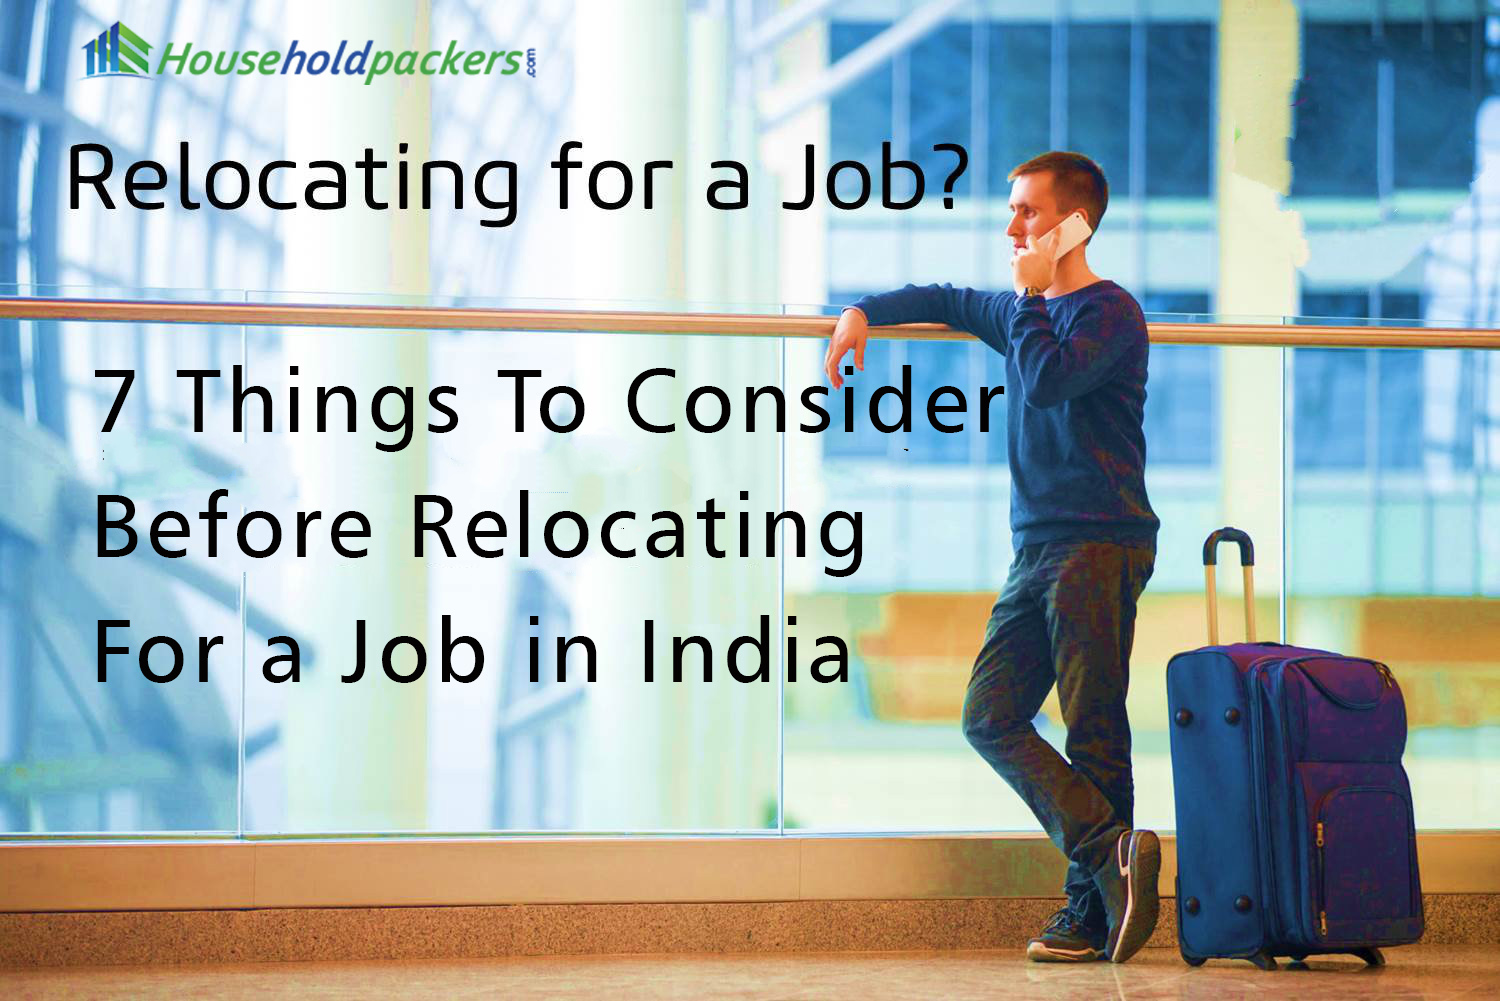 7 Things To Consider Before Relocating For a Job in India